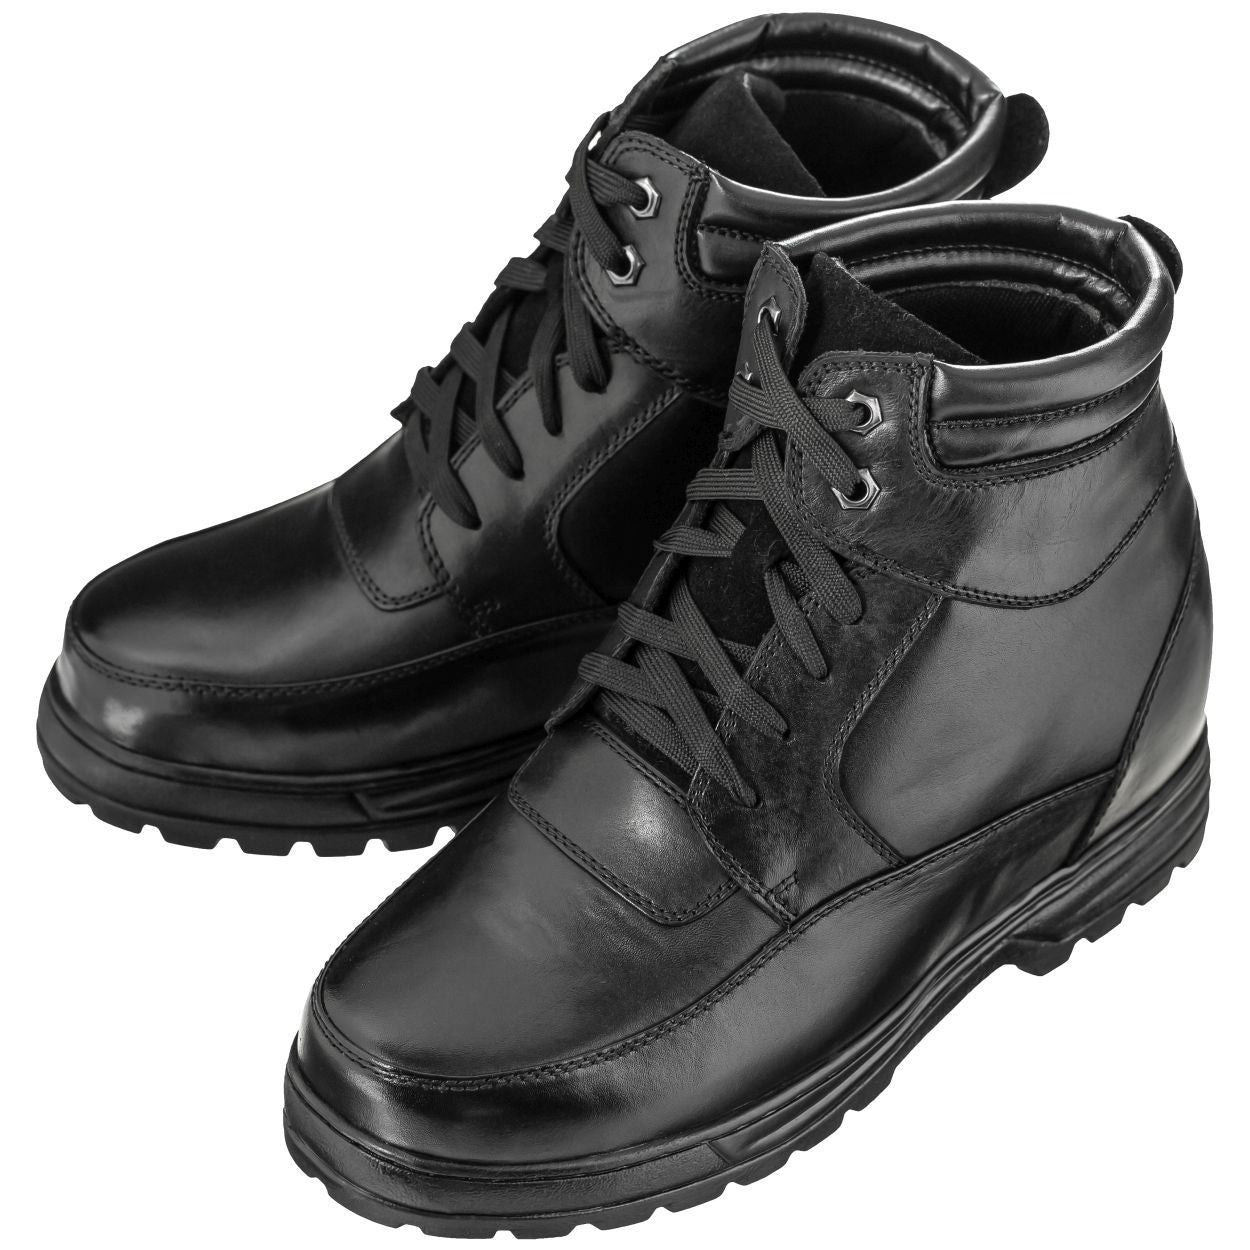 Elevator shoes height increase CALDEN Military-Style Leather Boots - 5.2 Inches - K881801